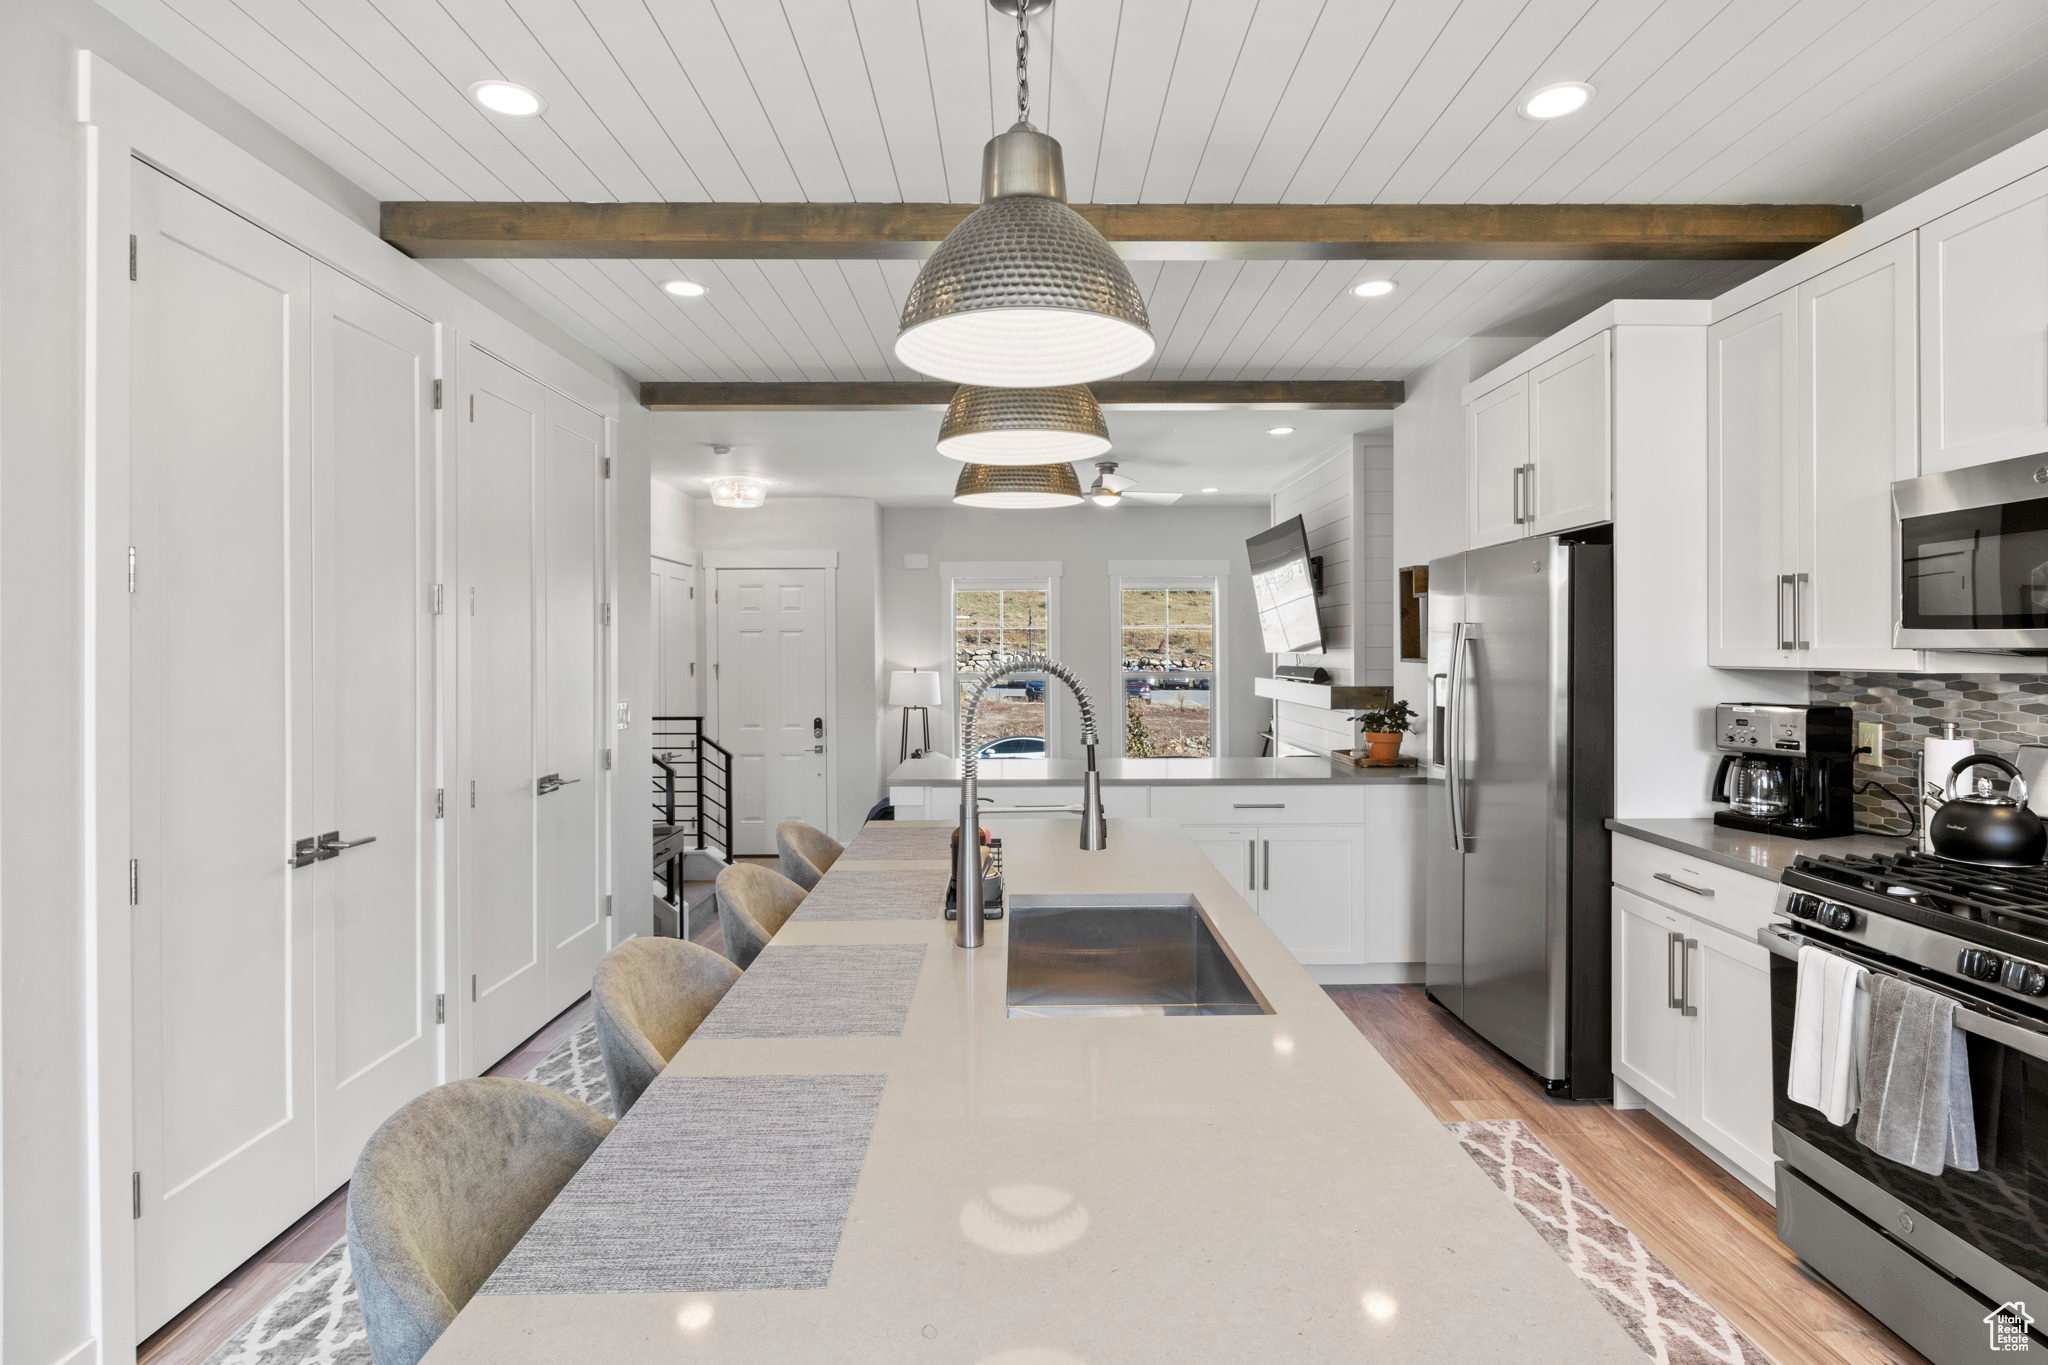 Kitchen with beamed ceiling, appliances with stainless steel finishes, light hardwood / wood-style floors, tasteful backsplash, and pendant lighting